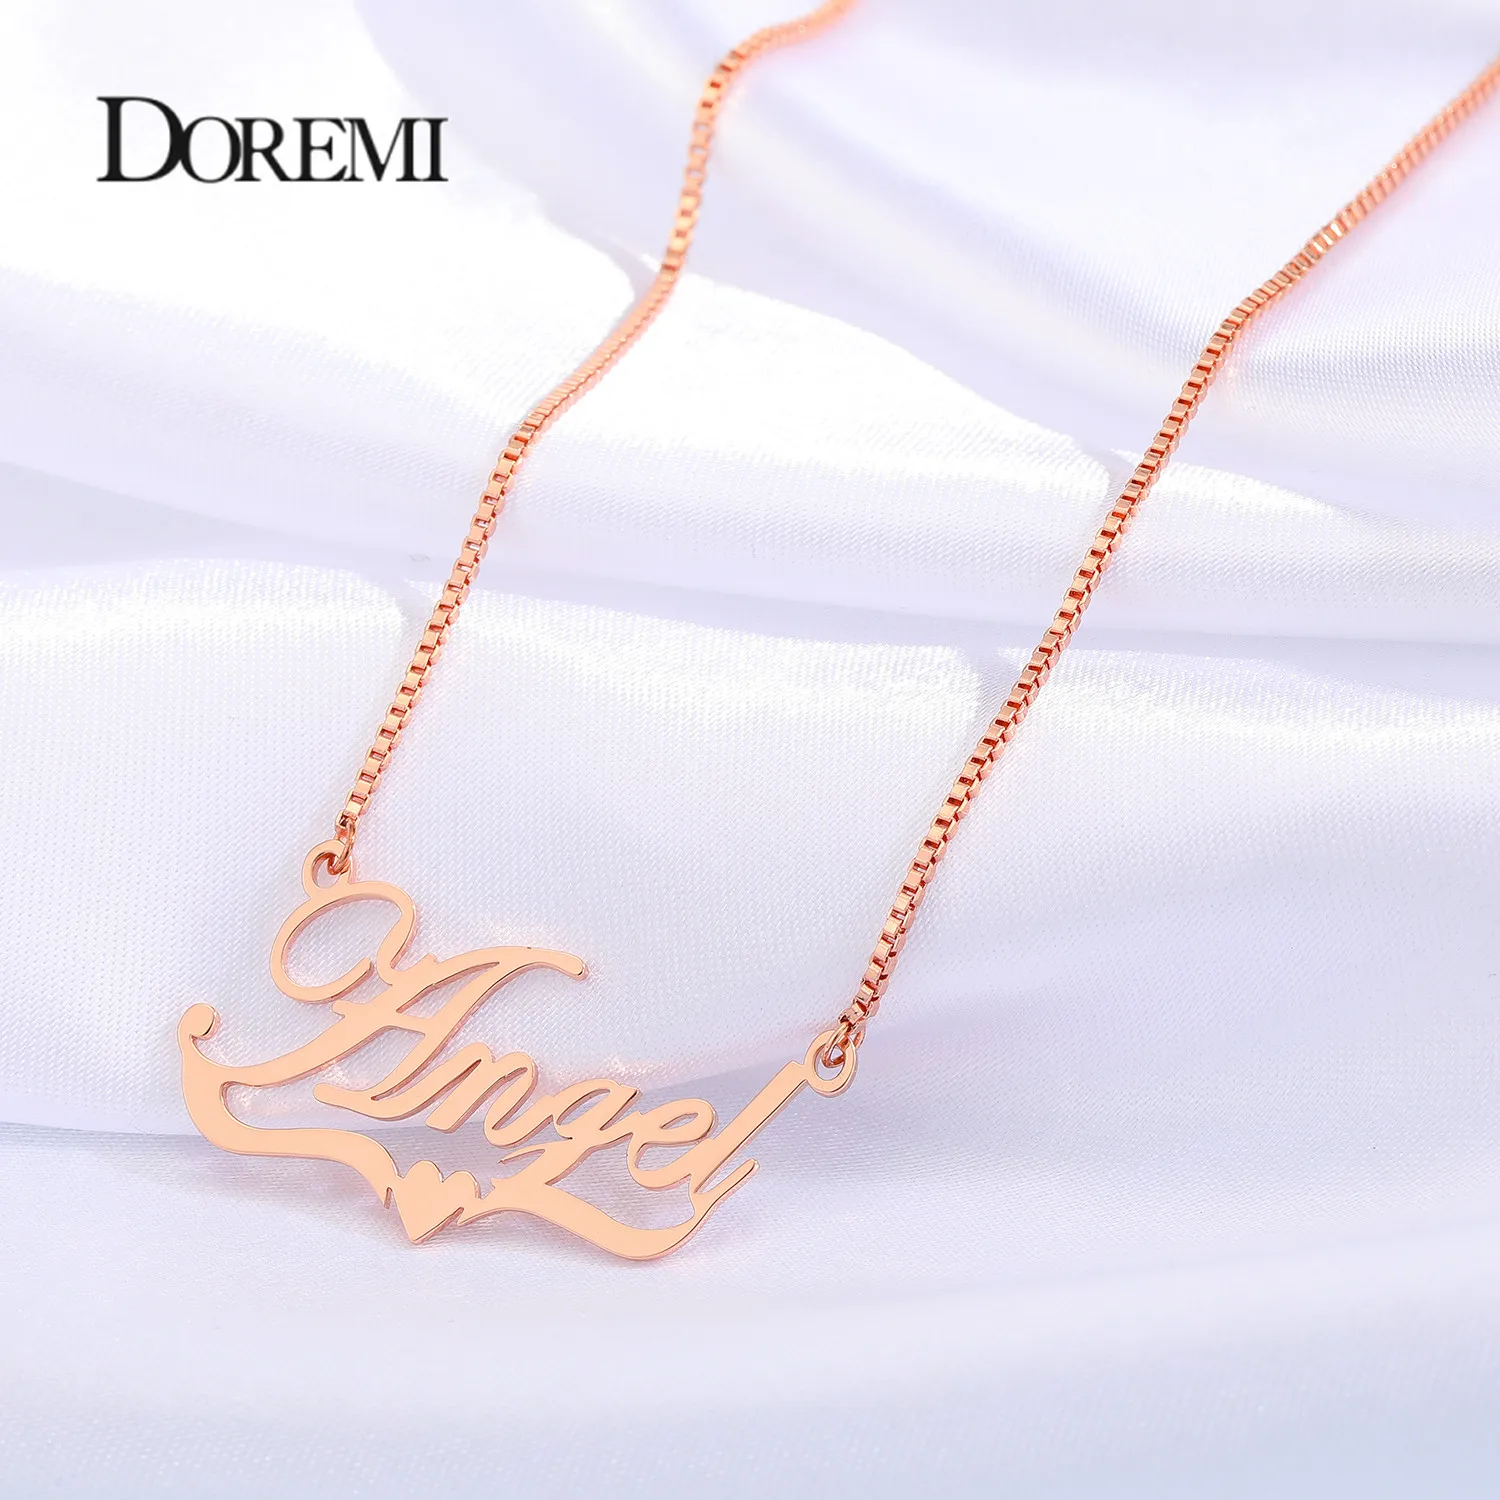 DOREMI Stainless Steel  Custom Name Necklace Personalized Name Pendant Heart Choker for Women Men Jewelry Valentine's Day Gift doremi script tont crystal name necklaces letters pendant necklace for women custom chain jewelry personalized valentine s day